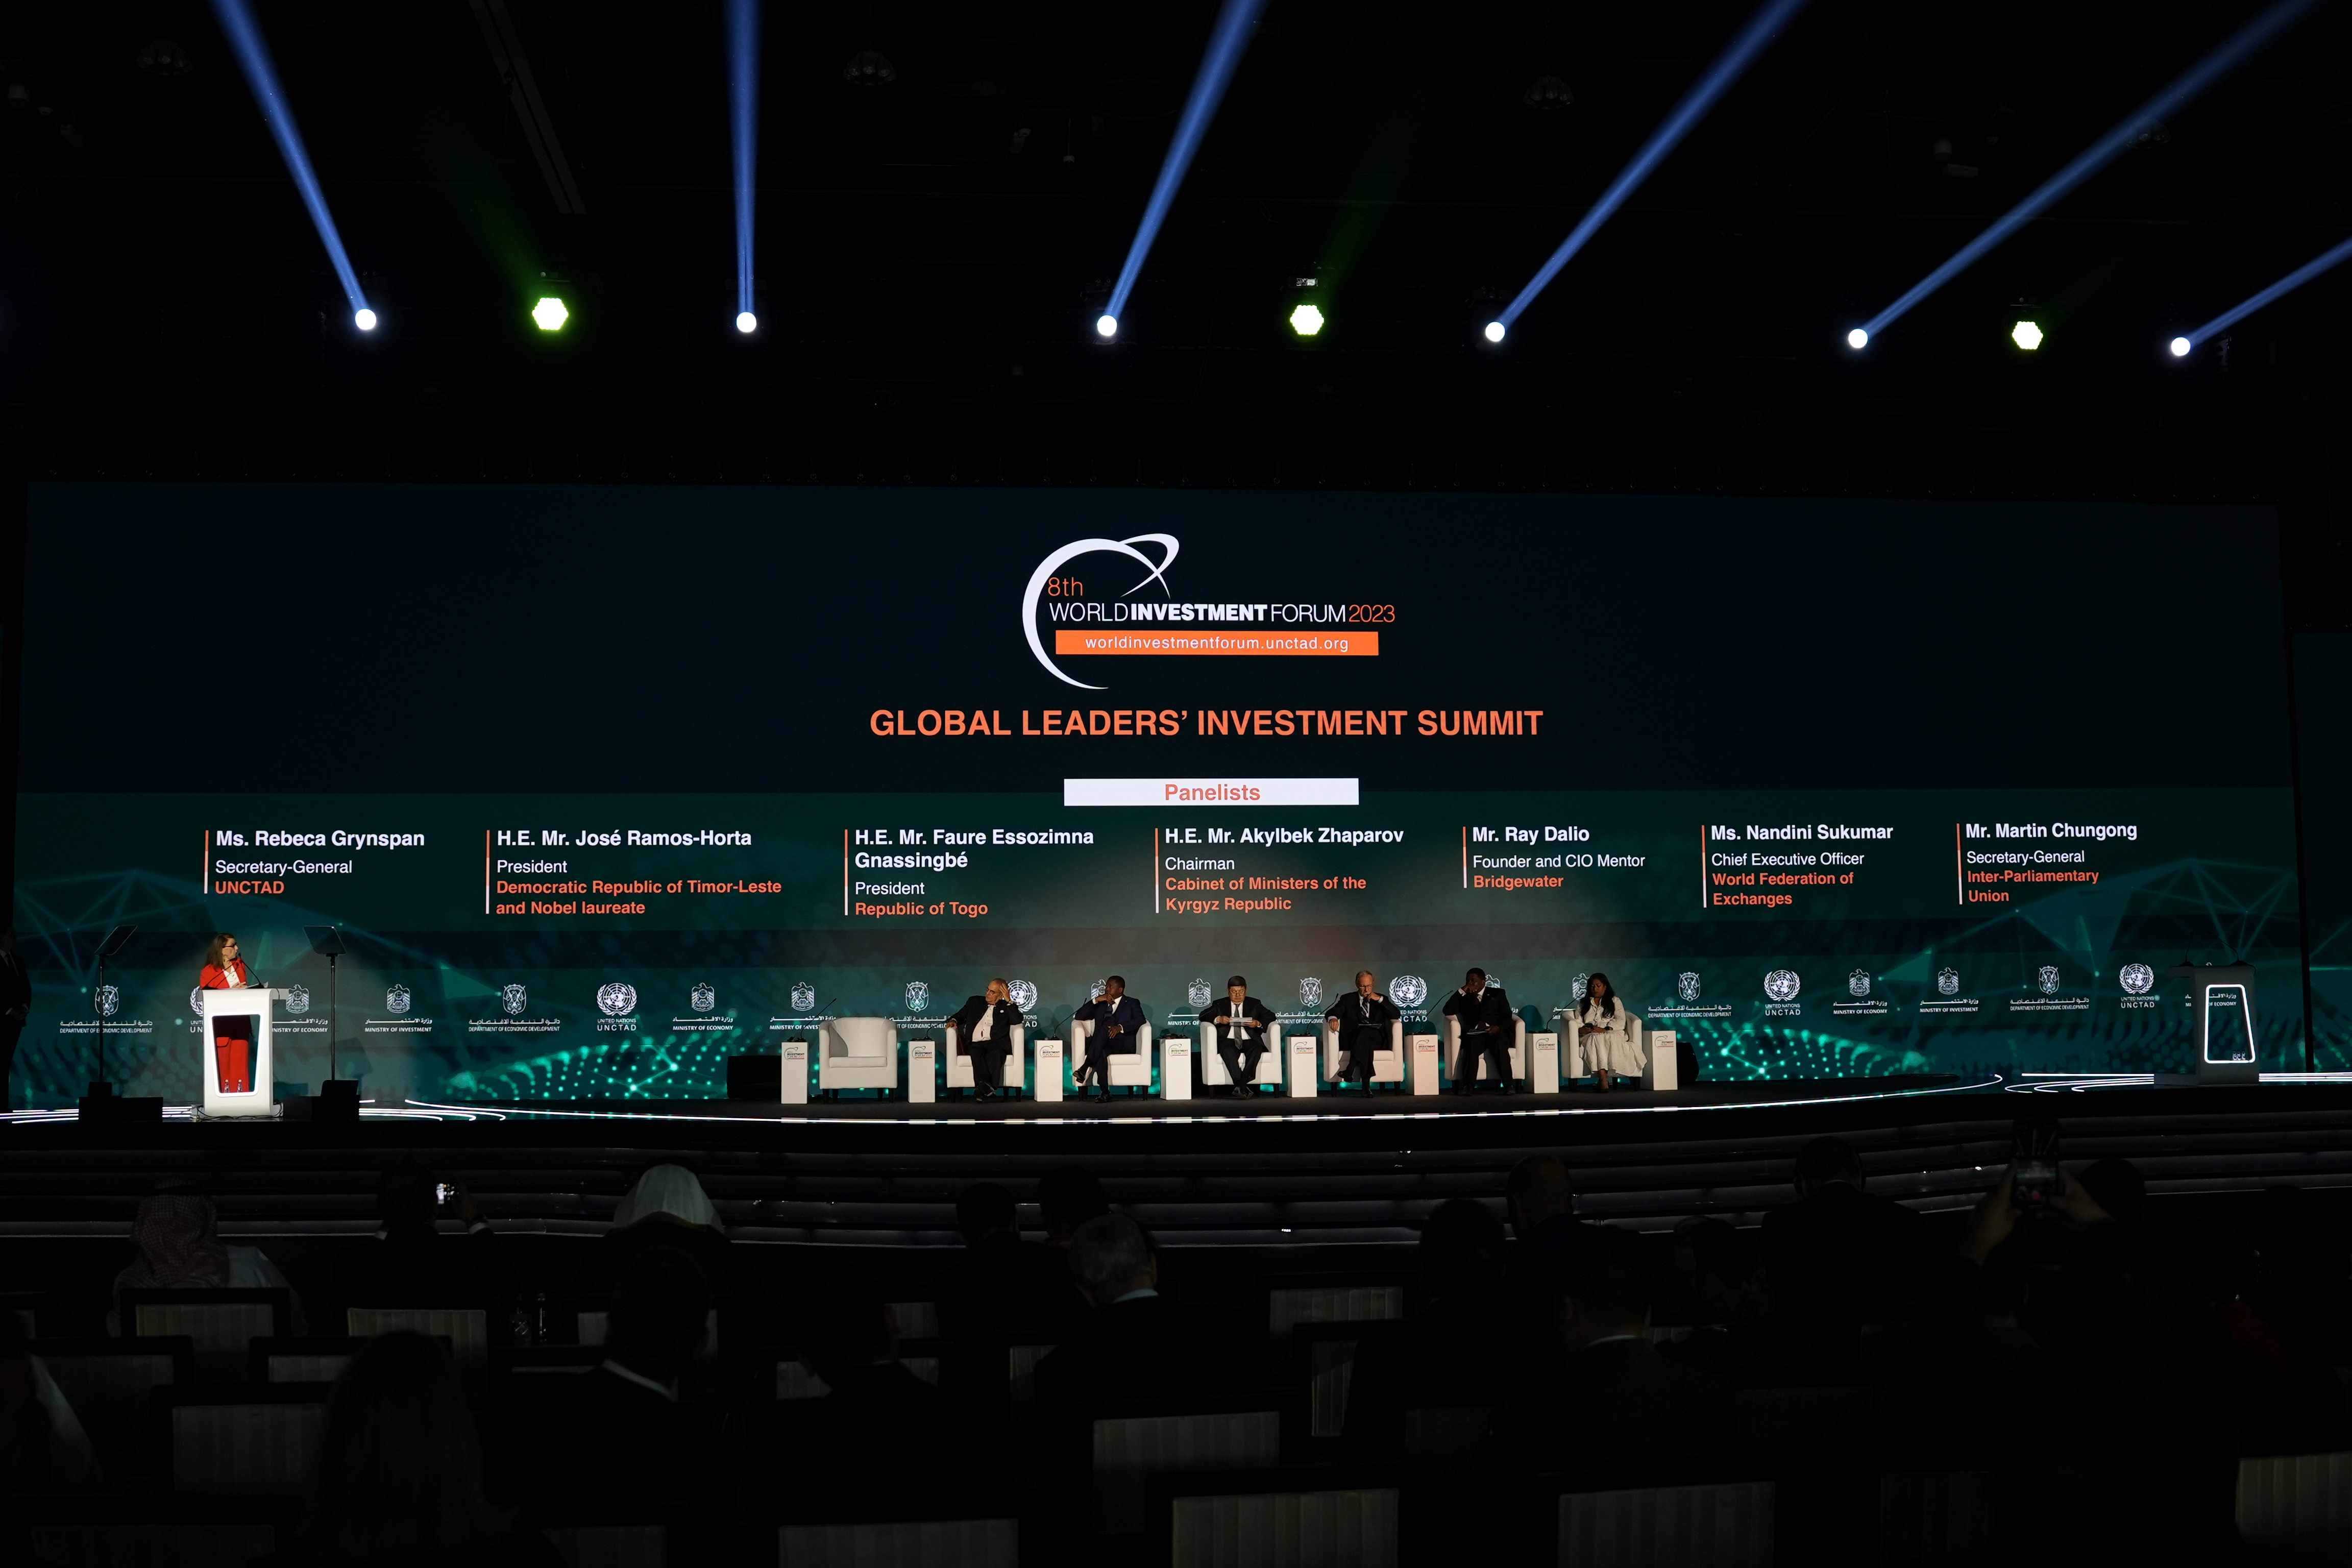 8th Edition Of World Investment Forum 2023 Commences In Abu Dhabi, Addressing Investment For Sustainable Development